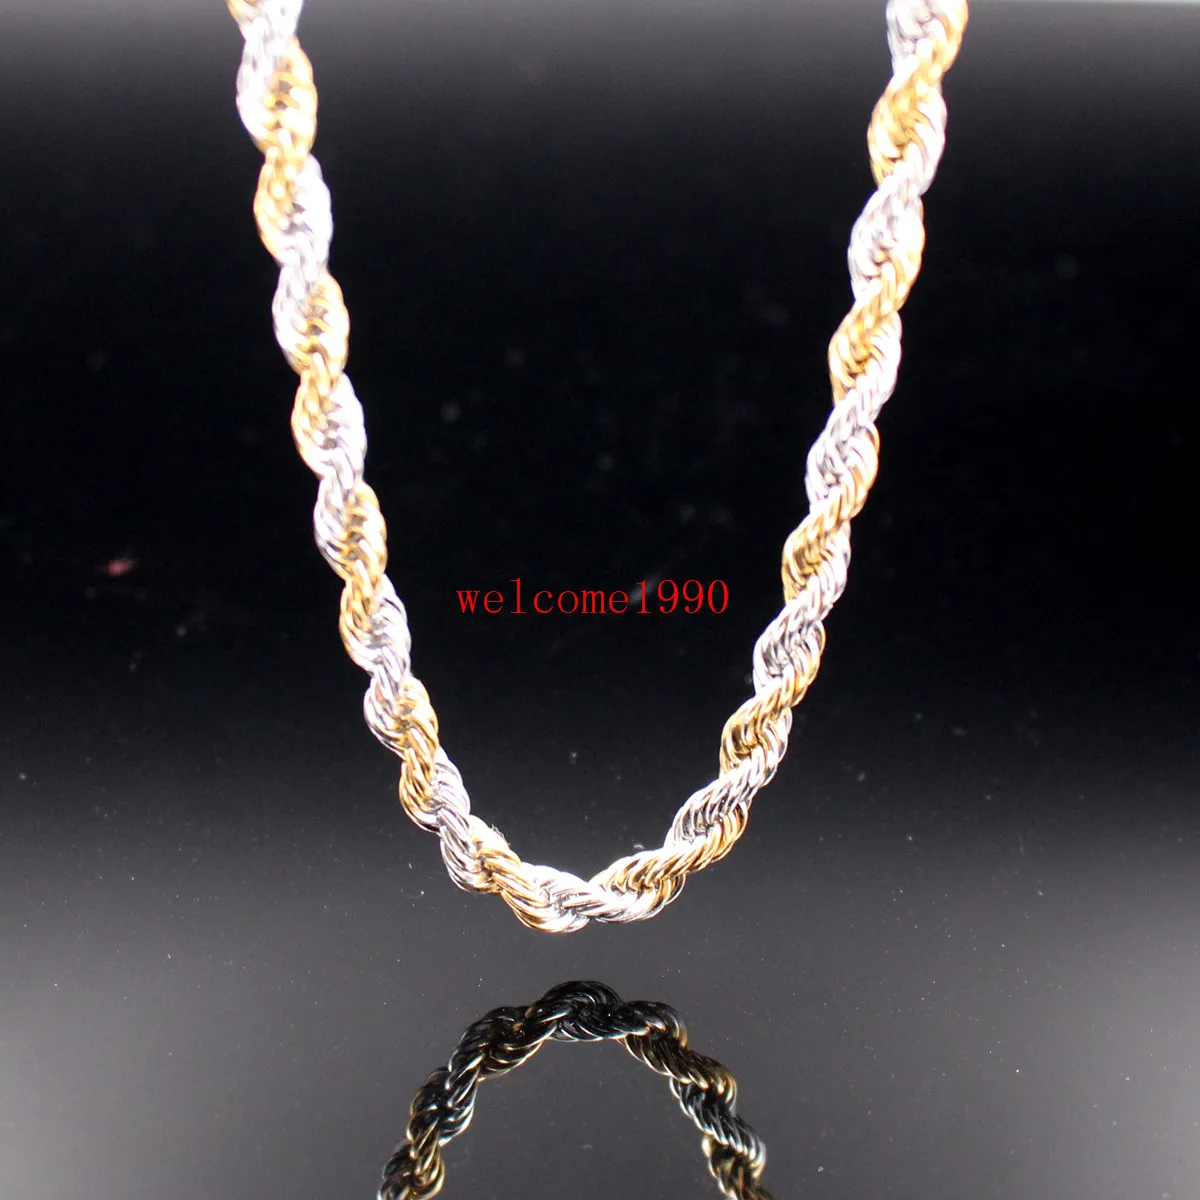 24 inch 5mm 6mm Gold Silver Stainless Steel ed singapore chain Rope Chain Link Necklaces Women Men Brand New284g